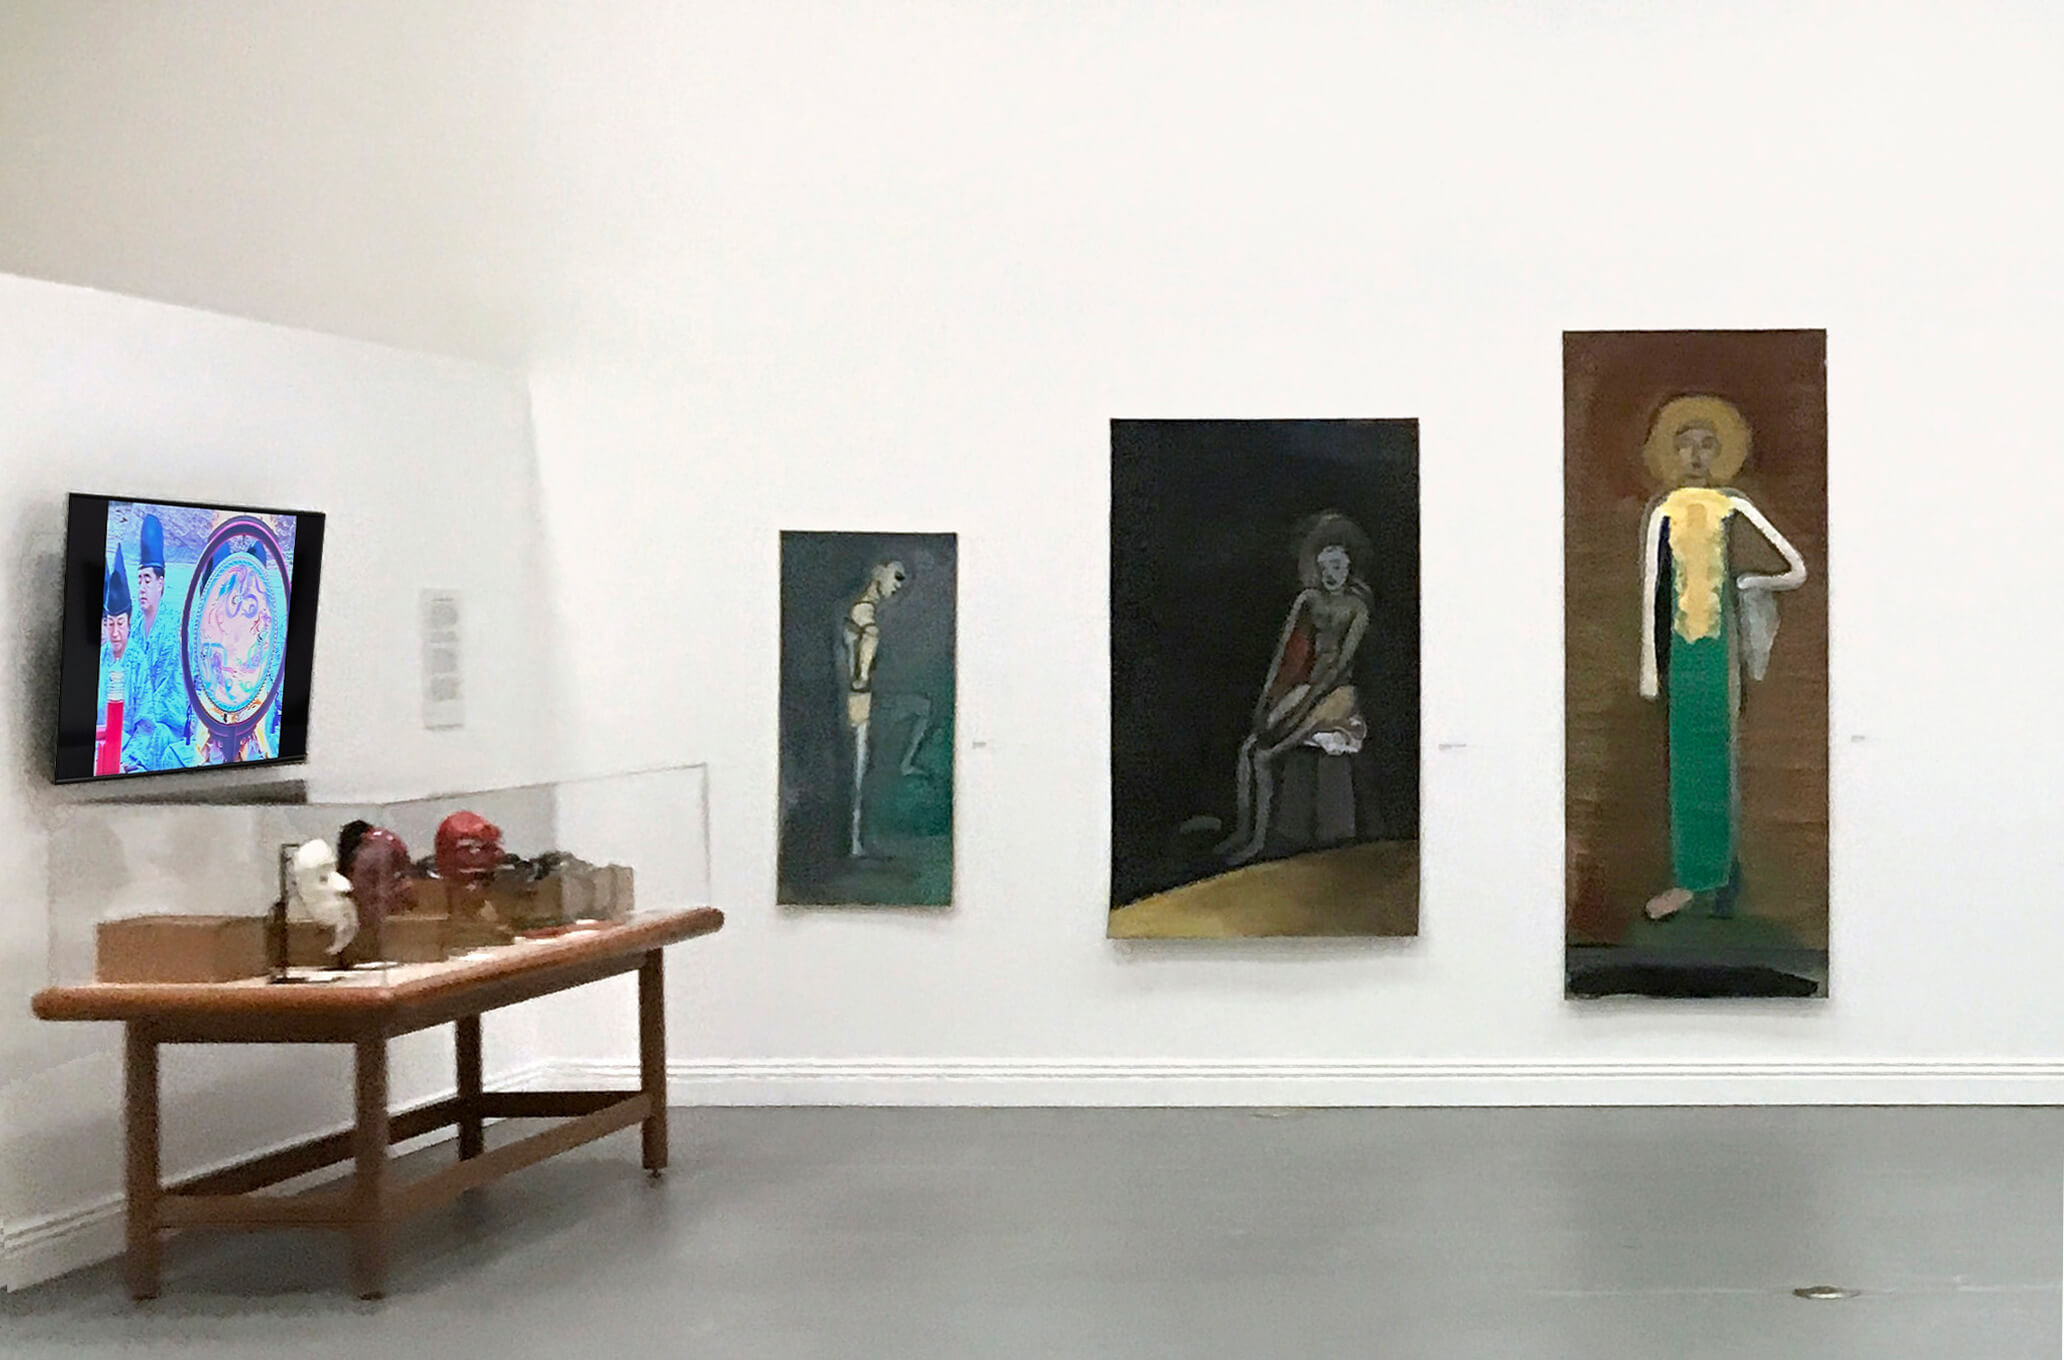 Installation view, Keisho Okayama: Selected Works - On the back wall: Male Dancer, 1978, Seated Figure/Ochre Edge, 1978 and Fayum Figure, 1985, all acrylic on paper. Case containing masks, instruments and boxes to the left.